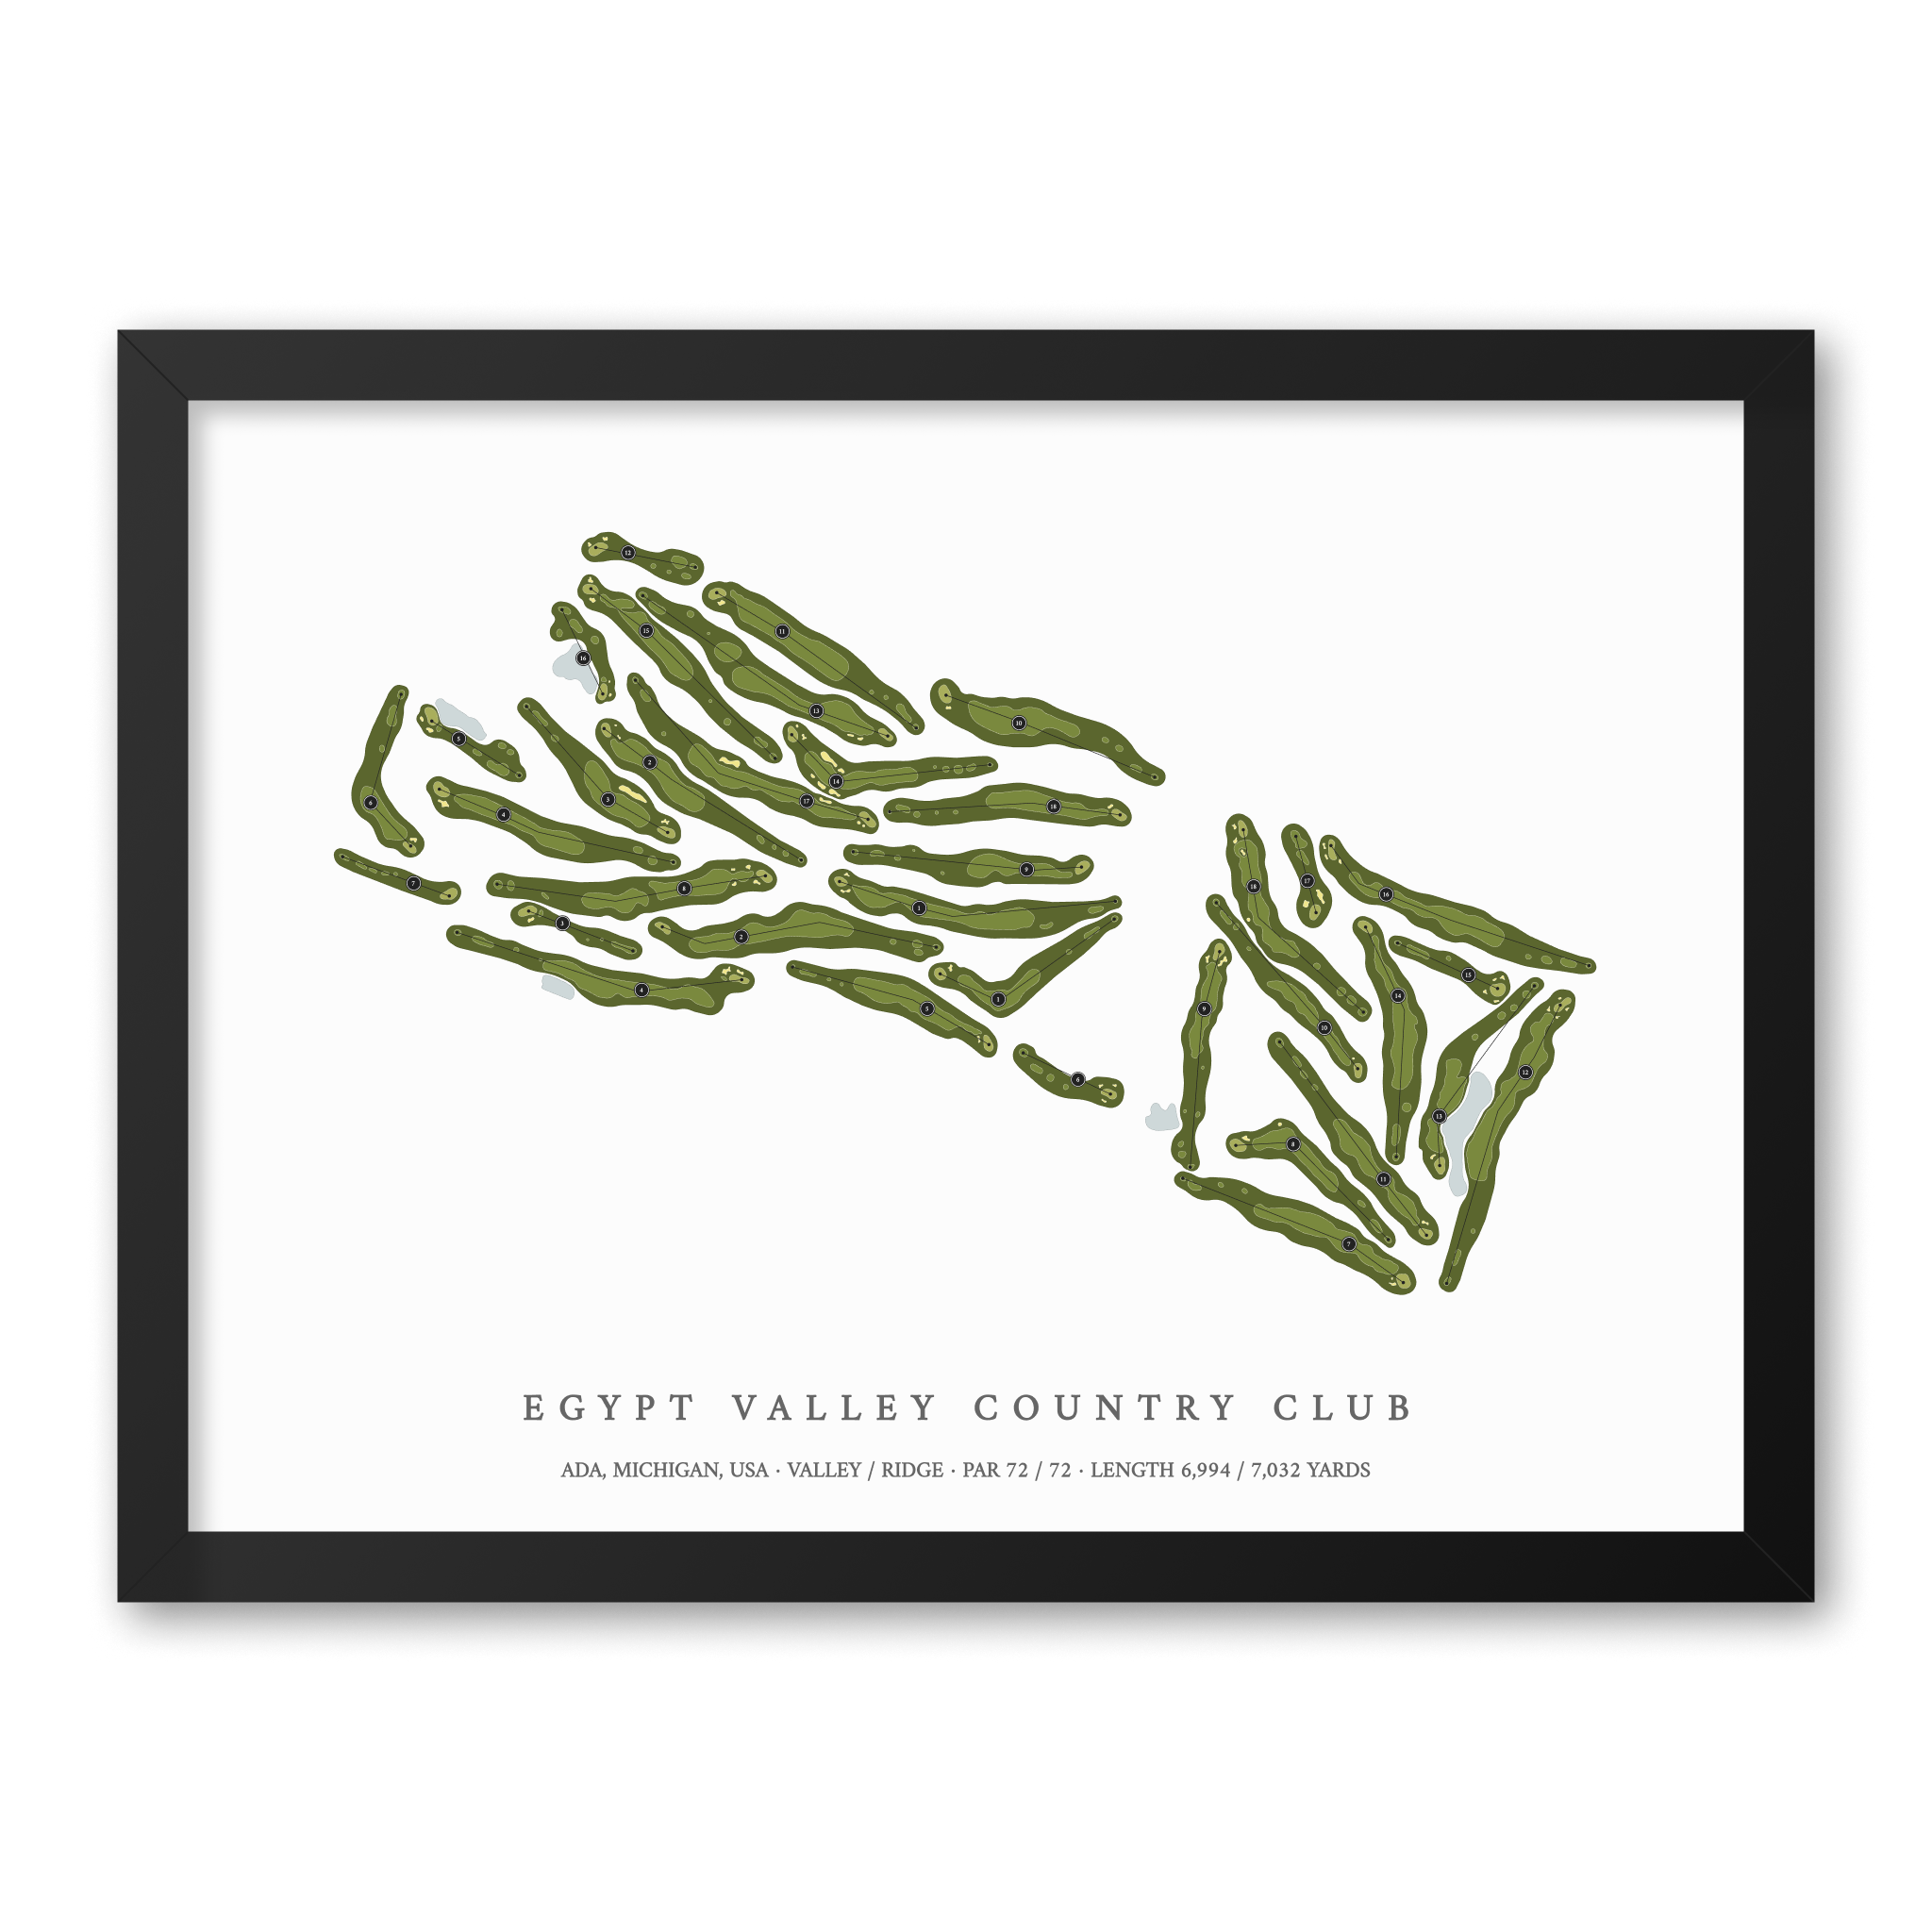 Egypt Valley Country Club | Golf Course Print | Black Frame